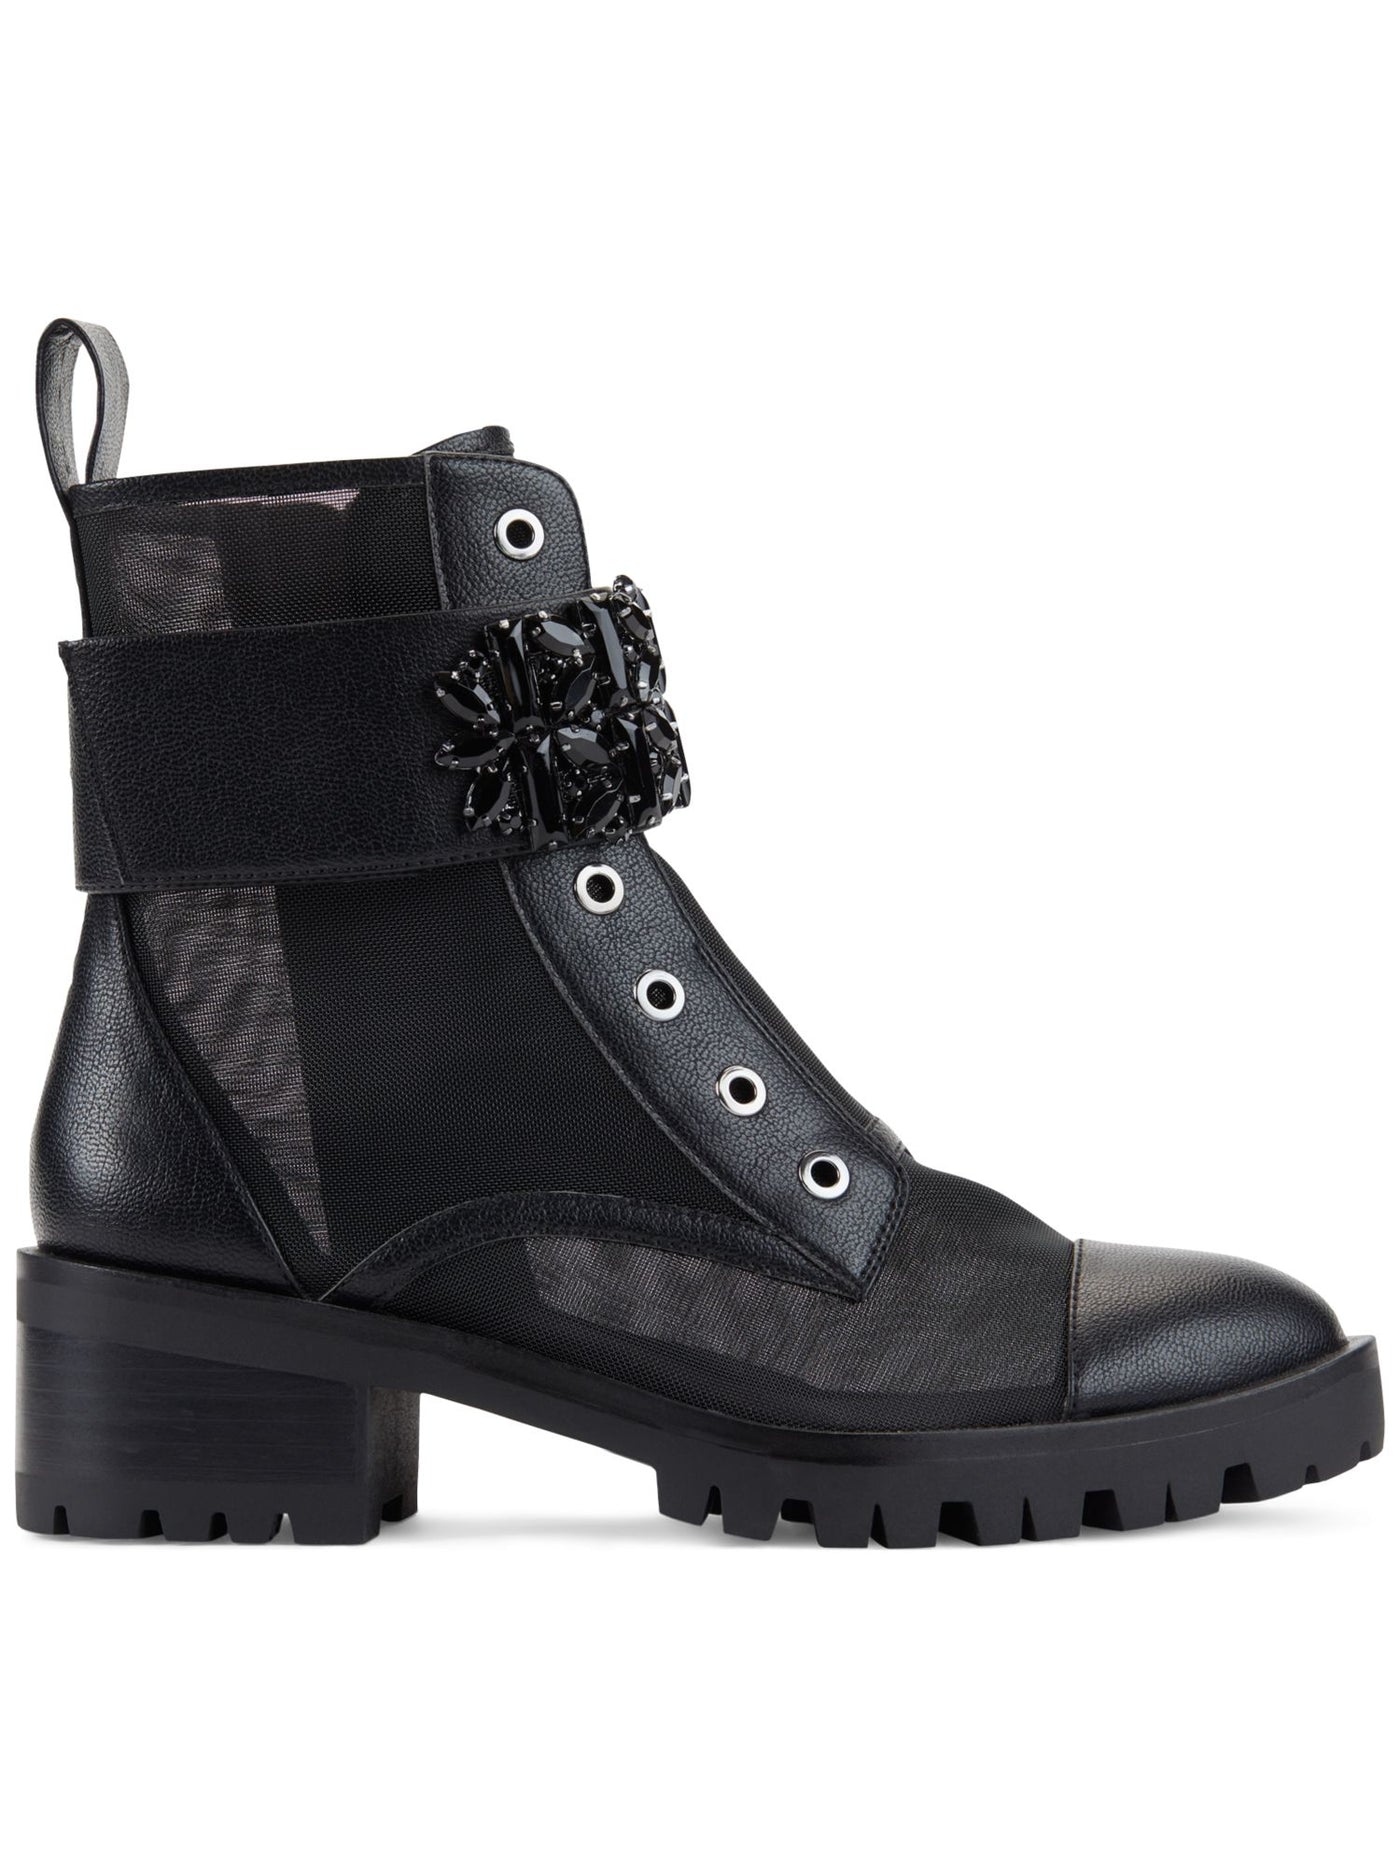 KARL LAGERFELD PARIS Womens Black Embellished Ankle Strap Eyelets Lug Sole Cushioned Pippa Round Toe Block Heel Zip-Up Combat Boots 9.5 M